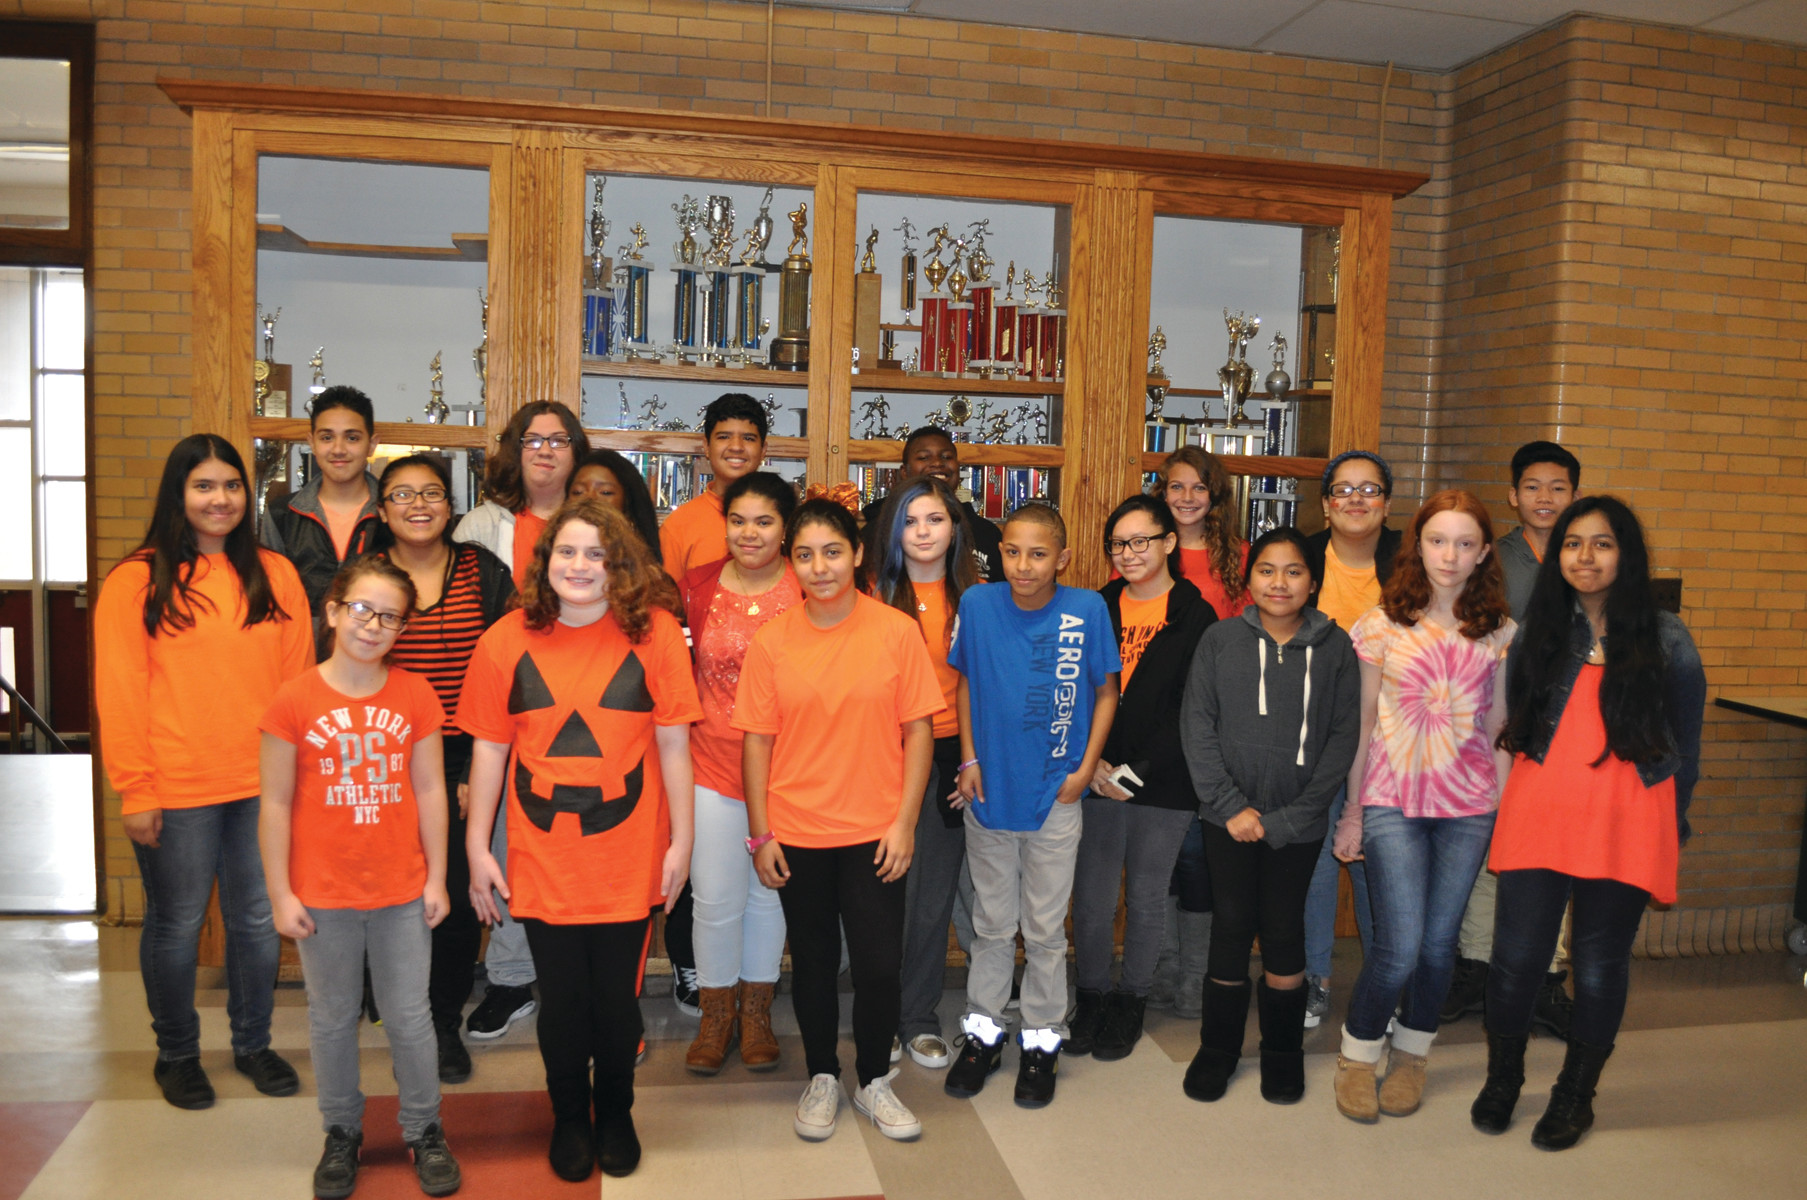 UNITING FOR KINDNESS: Hugh B. Bain Middle School combined its “Go Orange” drive with Unity Day on Oct. 29.